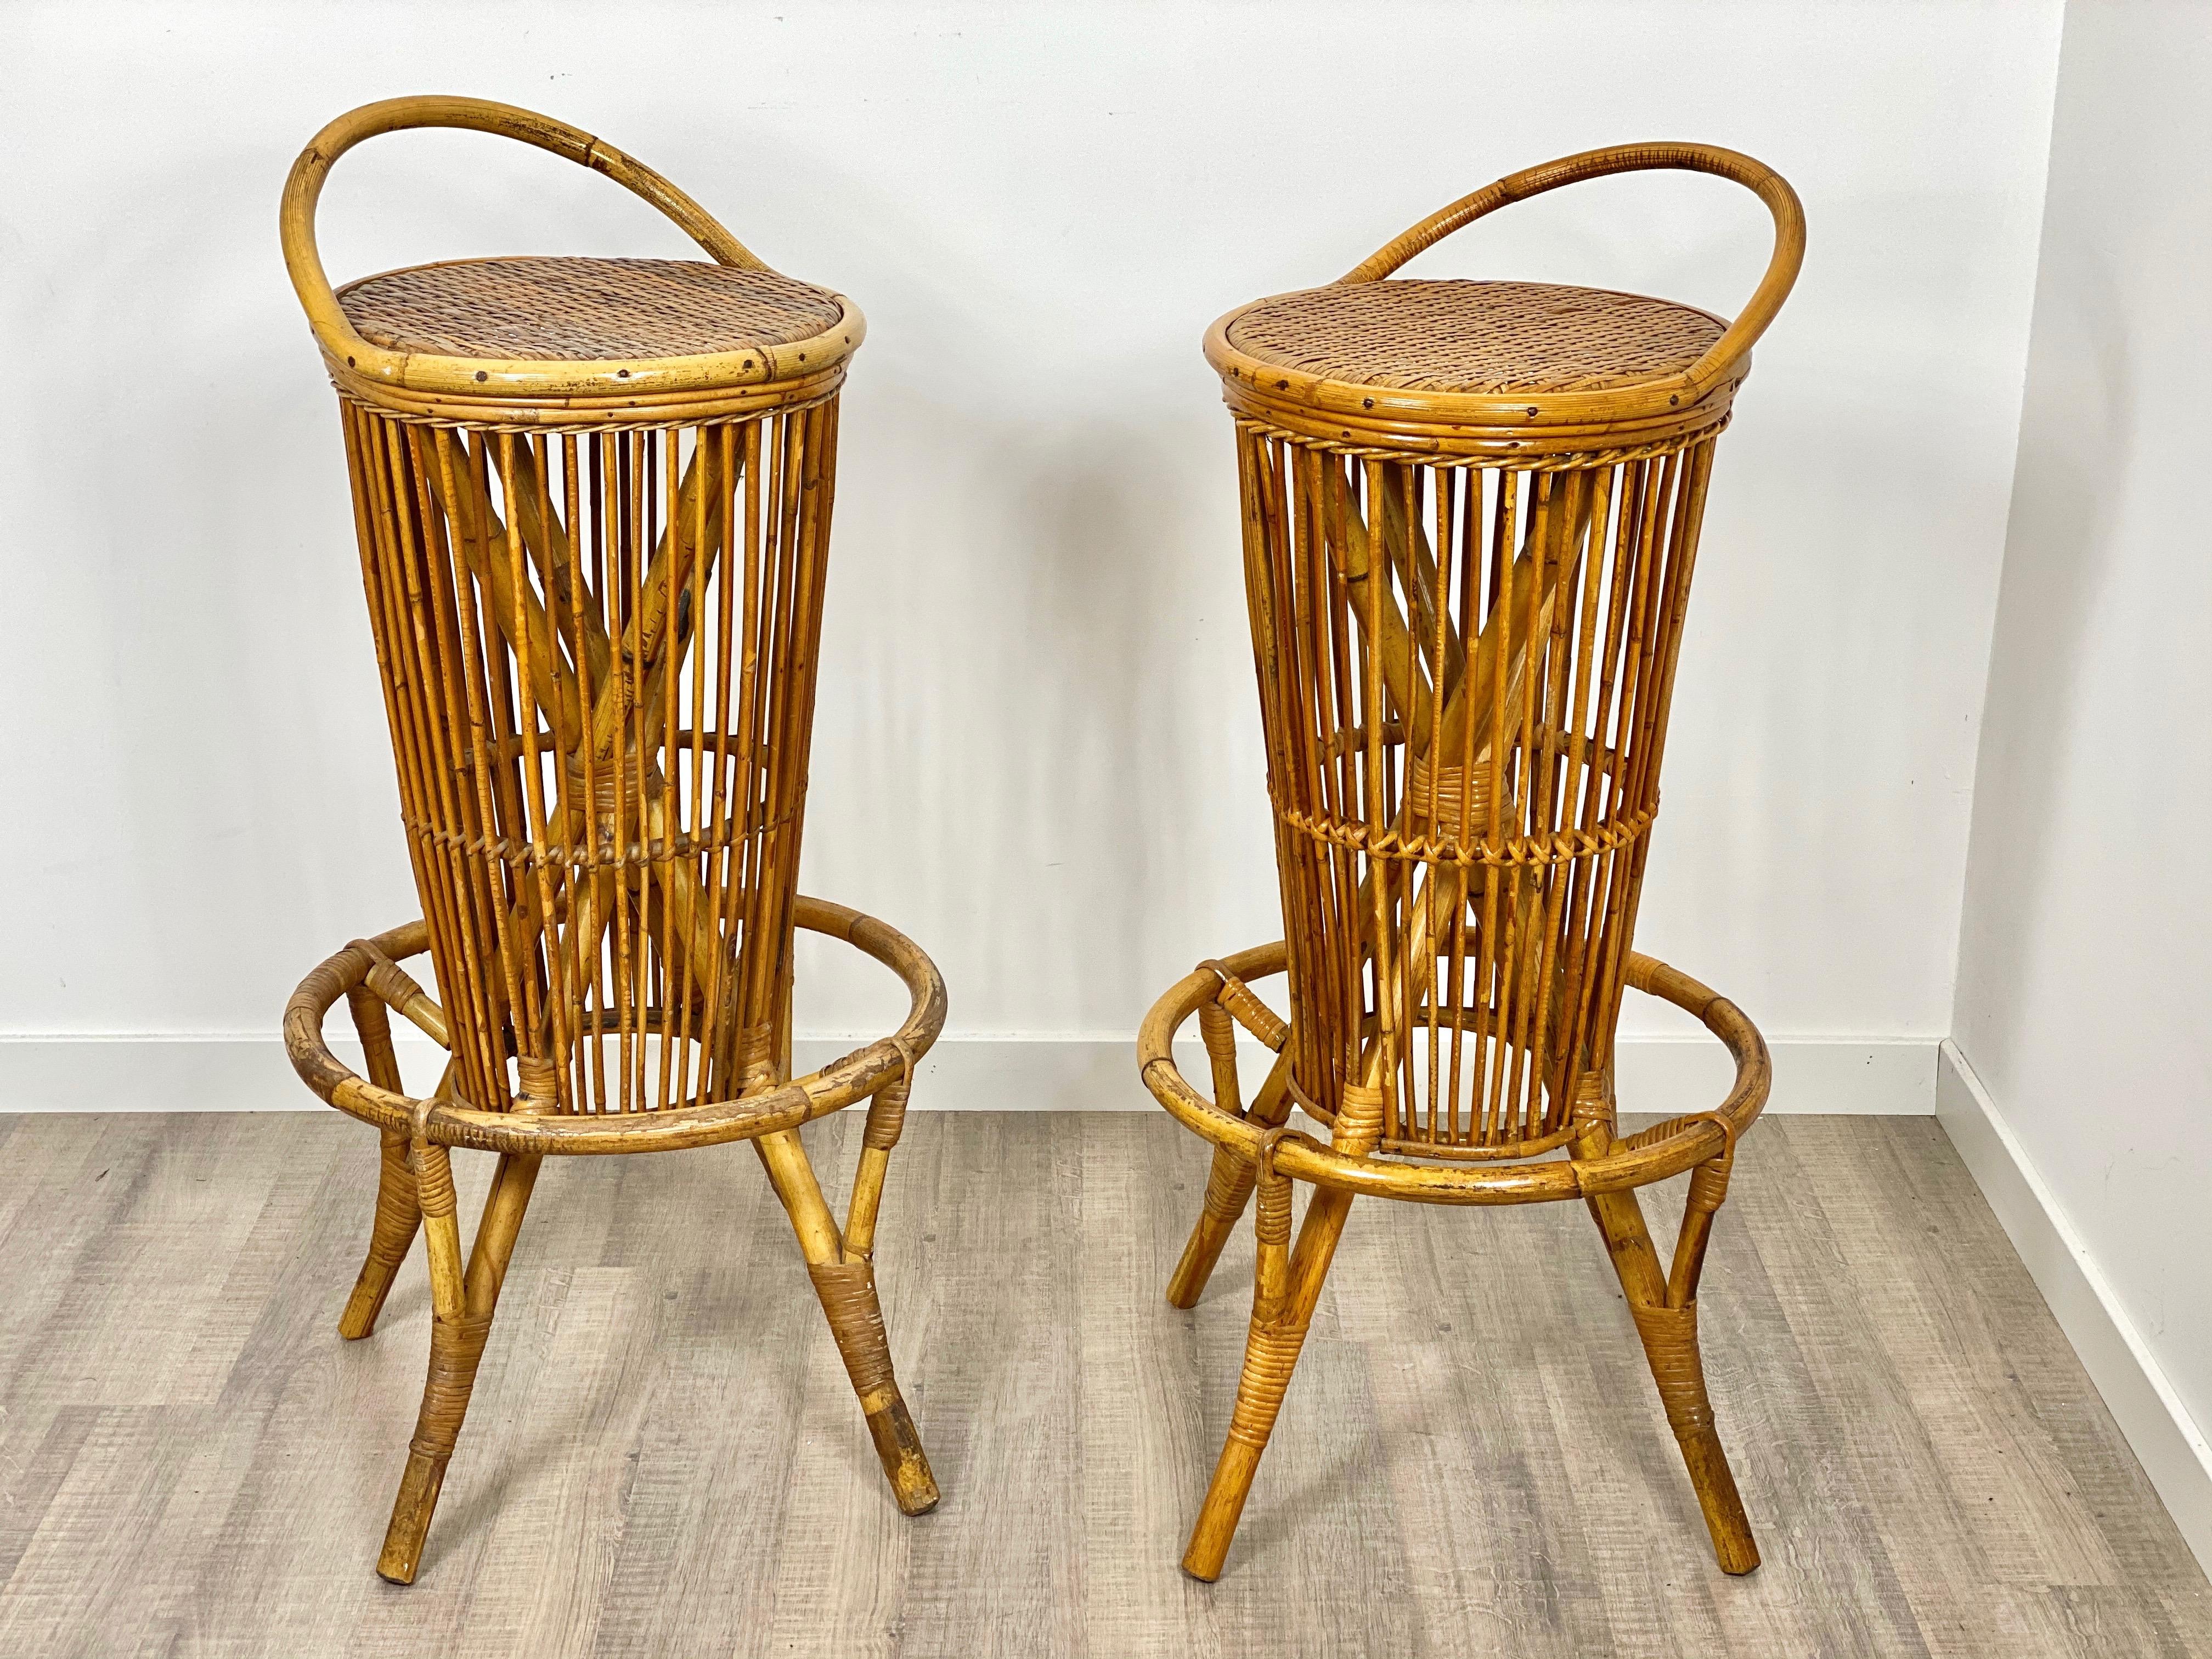 Pair of vintage bar stools in Bamboo & Rattan, Italy, 1960s.